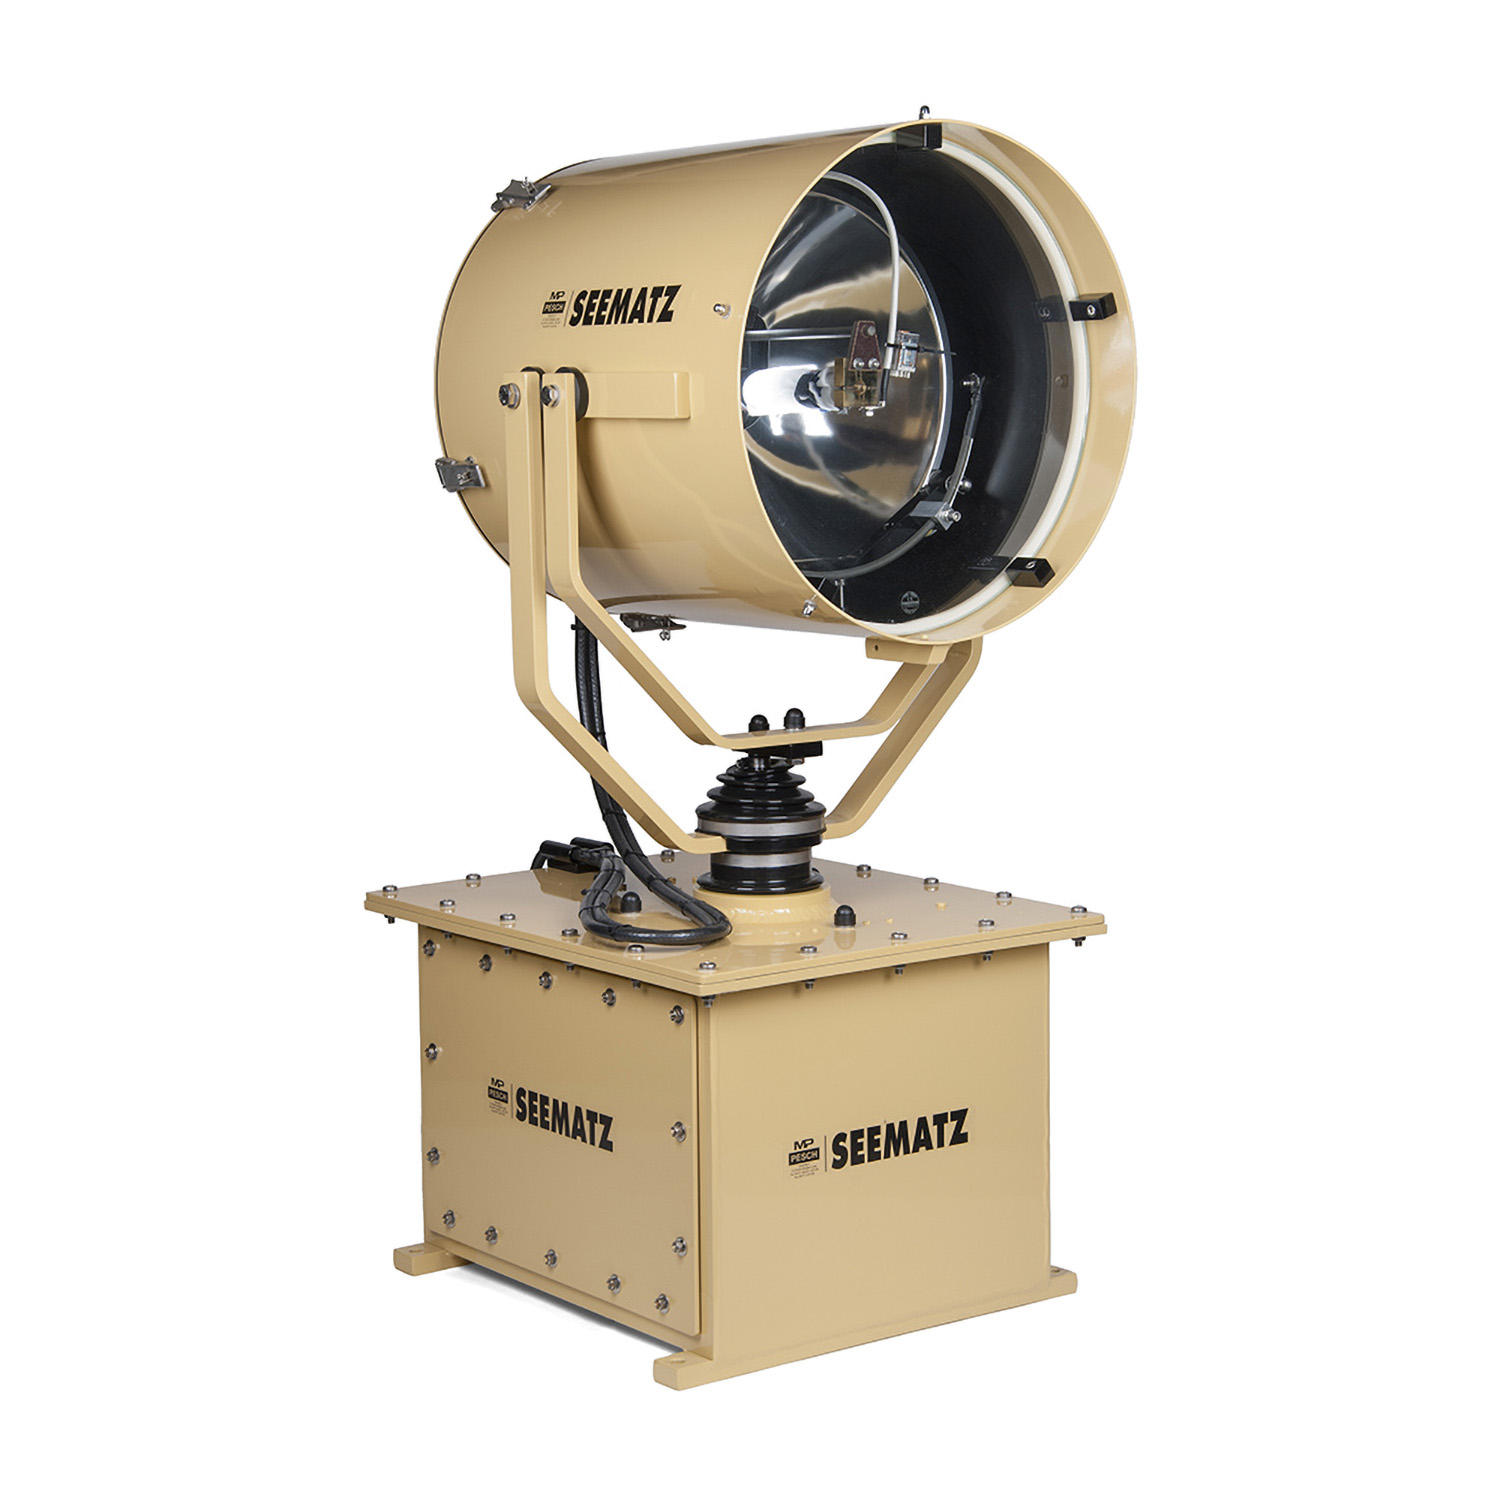 EFN525XBO2301000 Searchlight halogen 230VAC/1000W incl. 24VDC control, with control panel